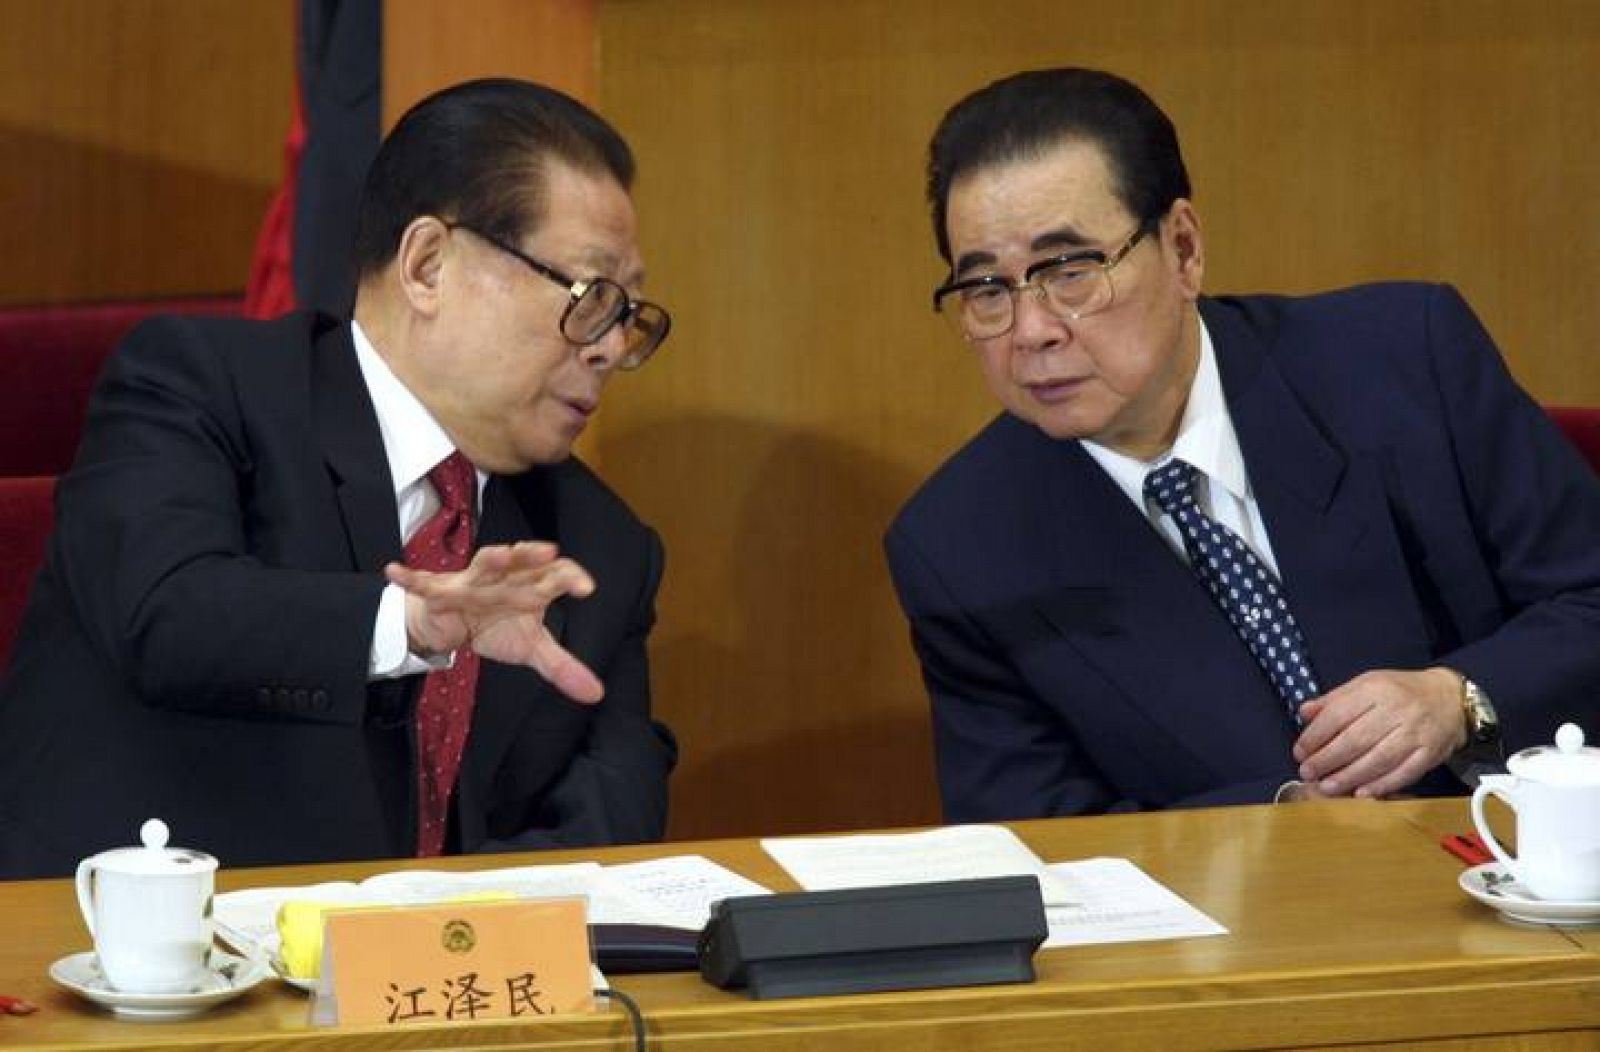 File picture of shows China's President Jiang with top lawmaker Li Peng, Chairman of the National People's Congress, in Beijing